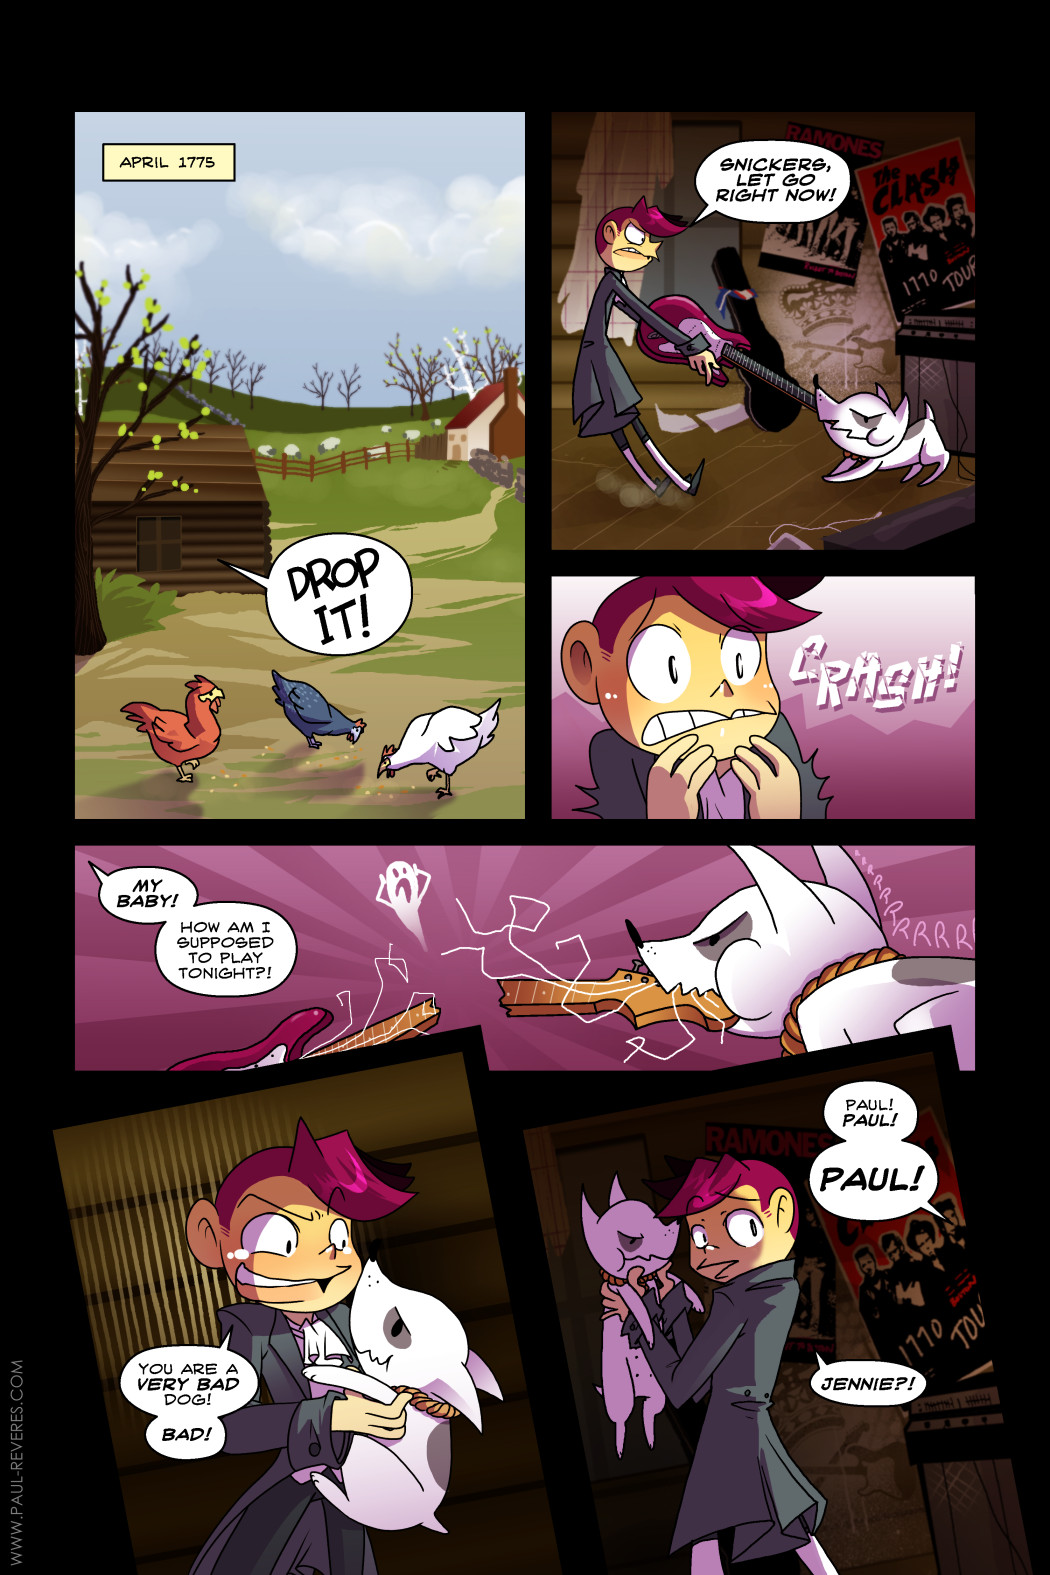 The Paul Reveres - Issue 1, Page 4